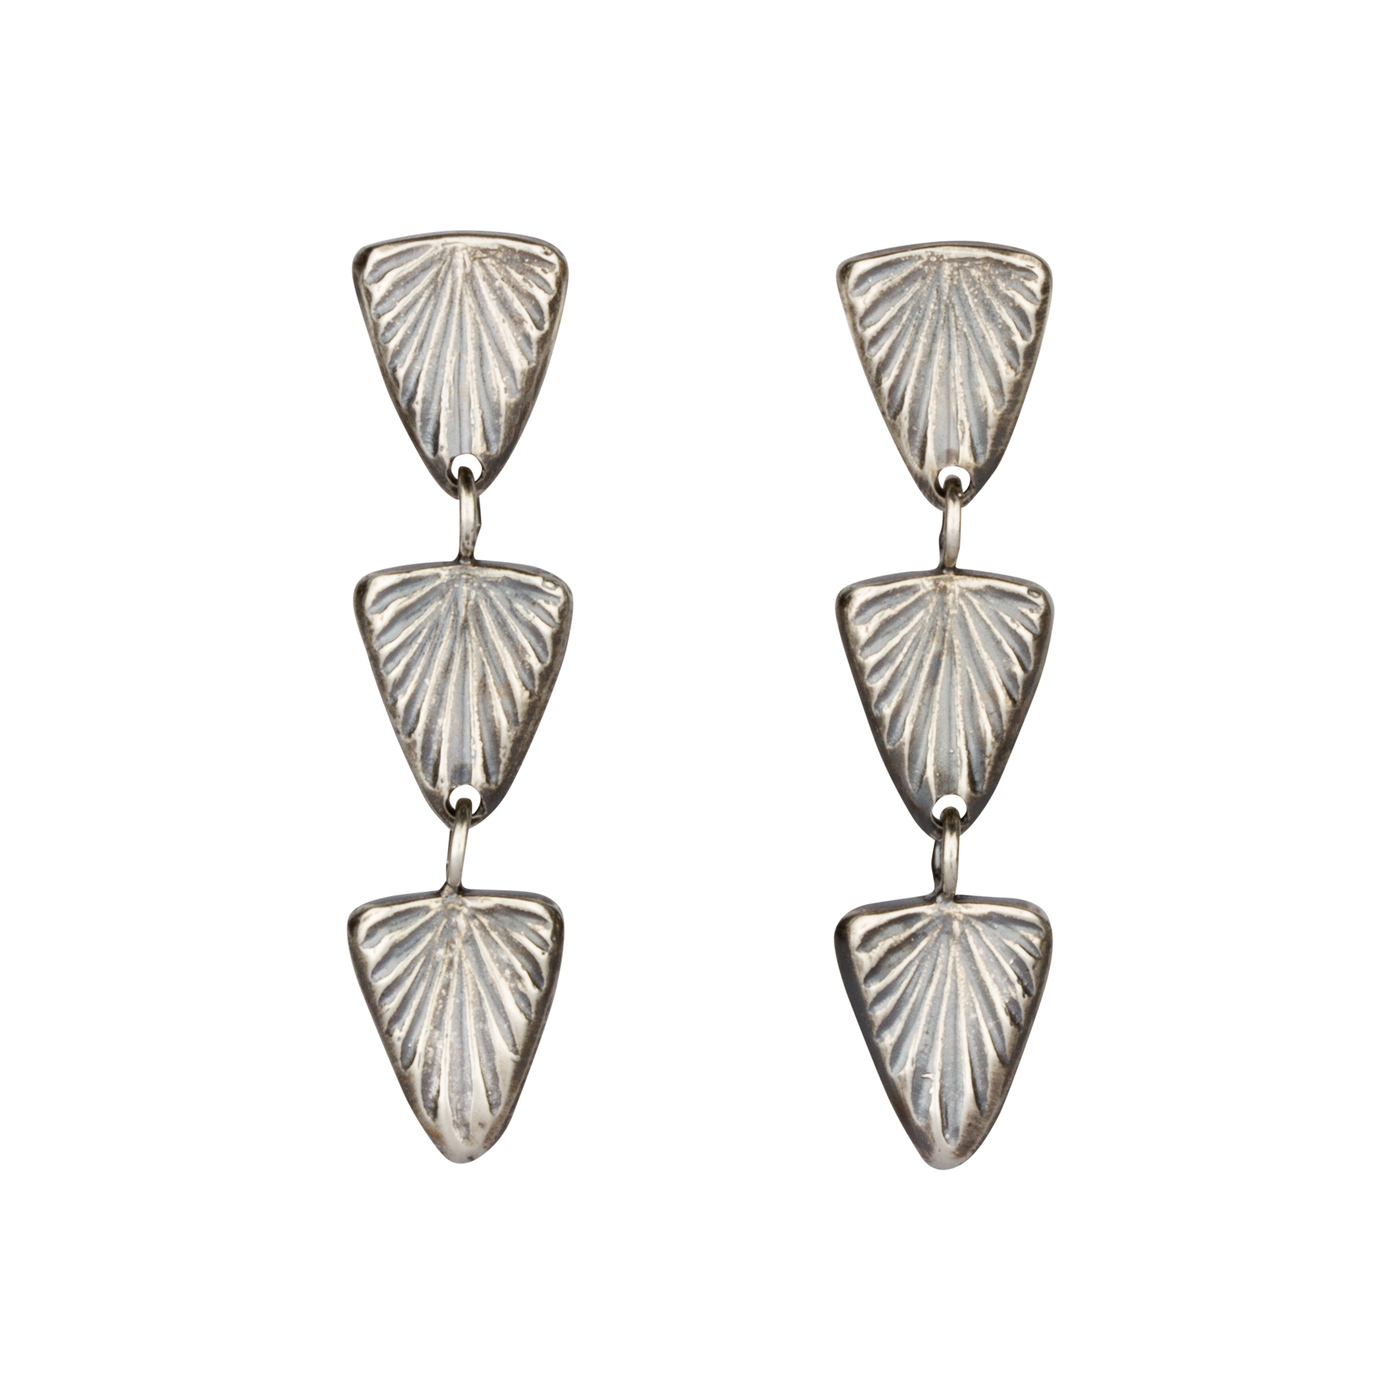 Oxidized silver triple drop earrings of cared triangular sparks with post backs on white